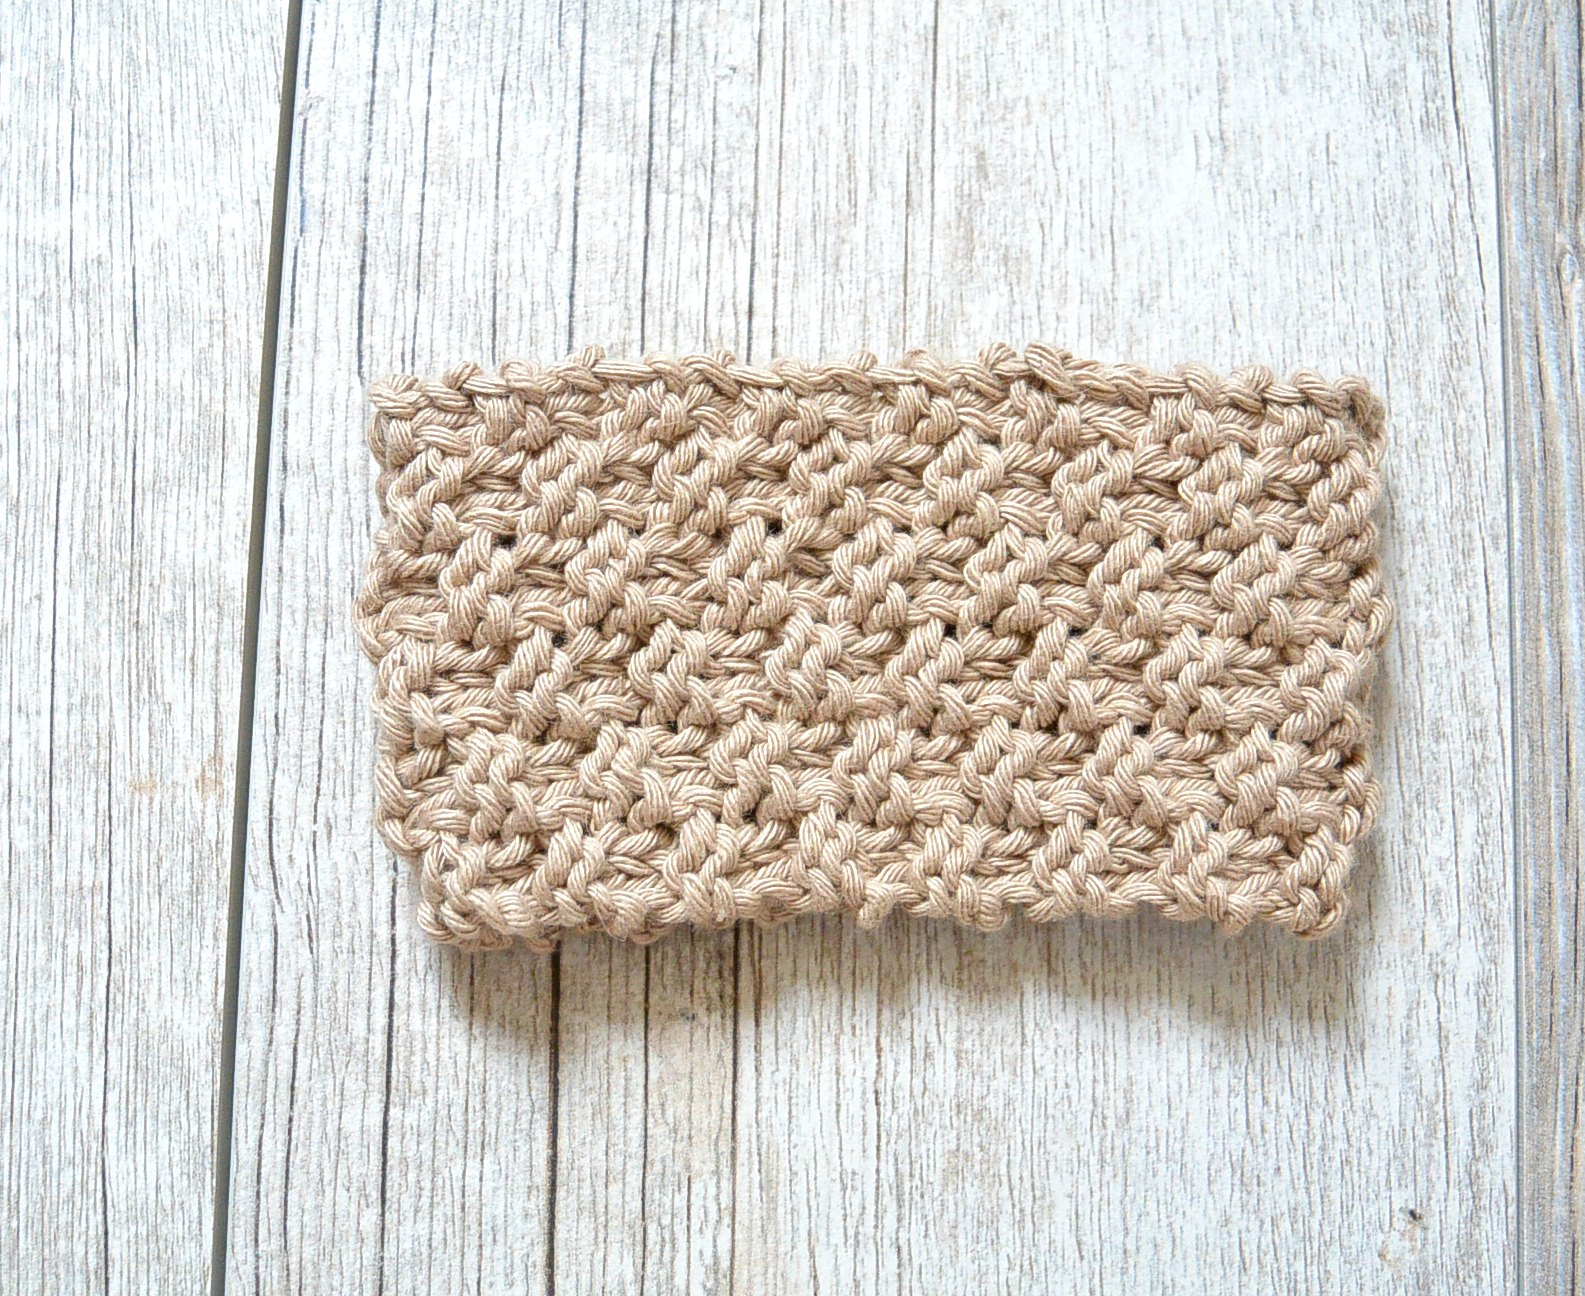 Cable Knit Coffee Cozy Pattern Double Seed Stitch Knit Coffee Cozy Mama In A Stitch